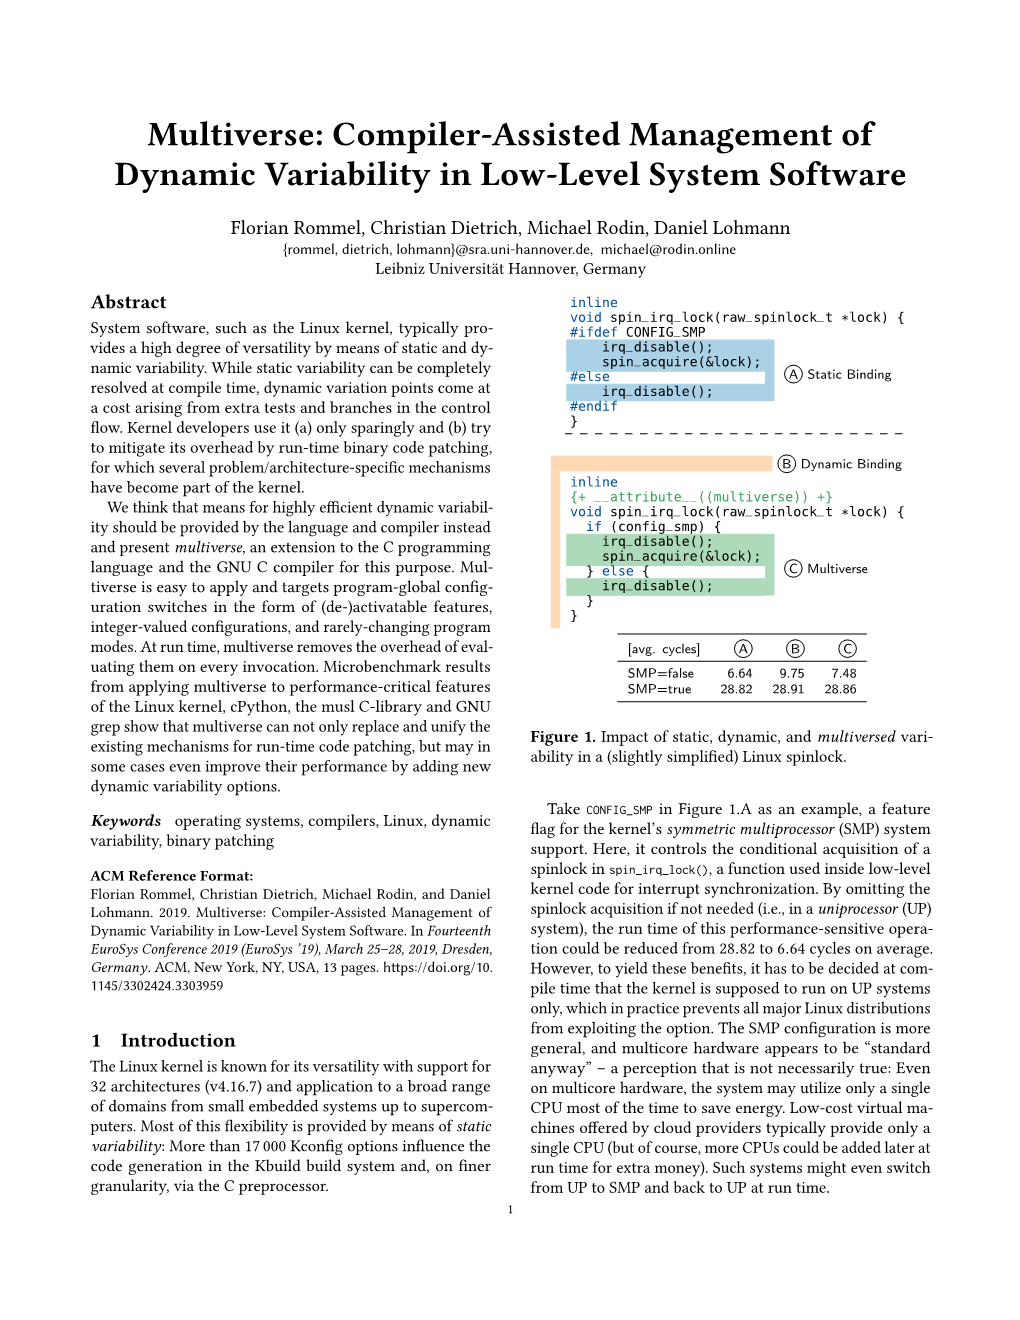 Multiverse: Compiler-Assisted Management of Dynamic Variability in Low-Level System Software